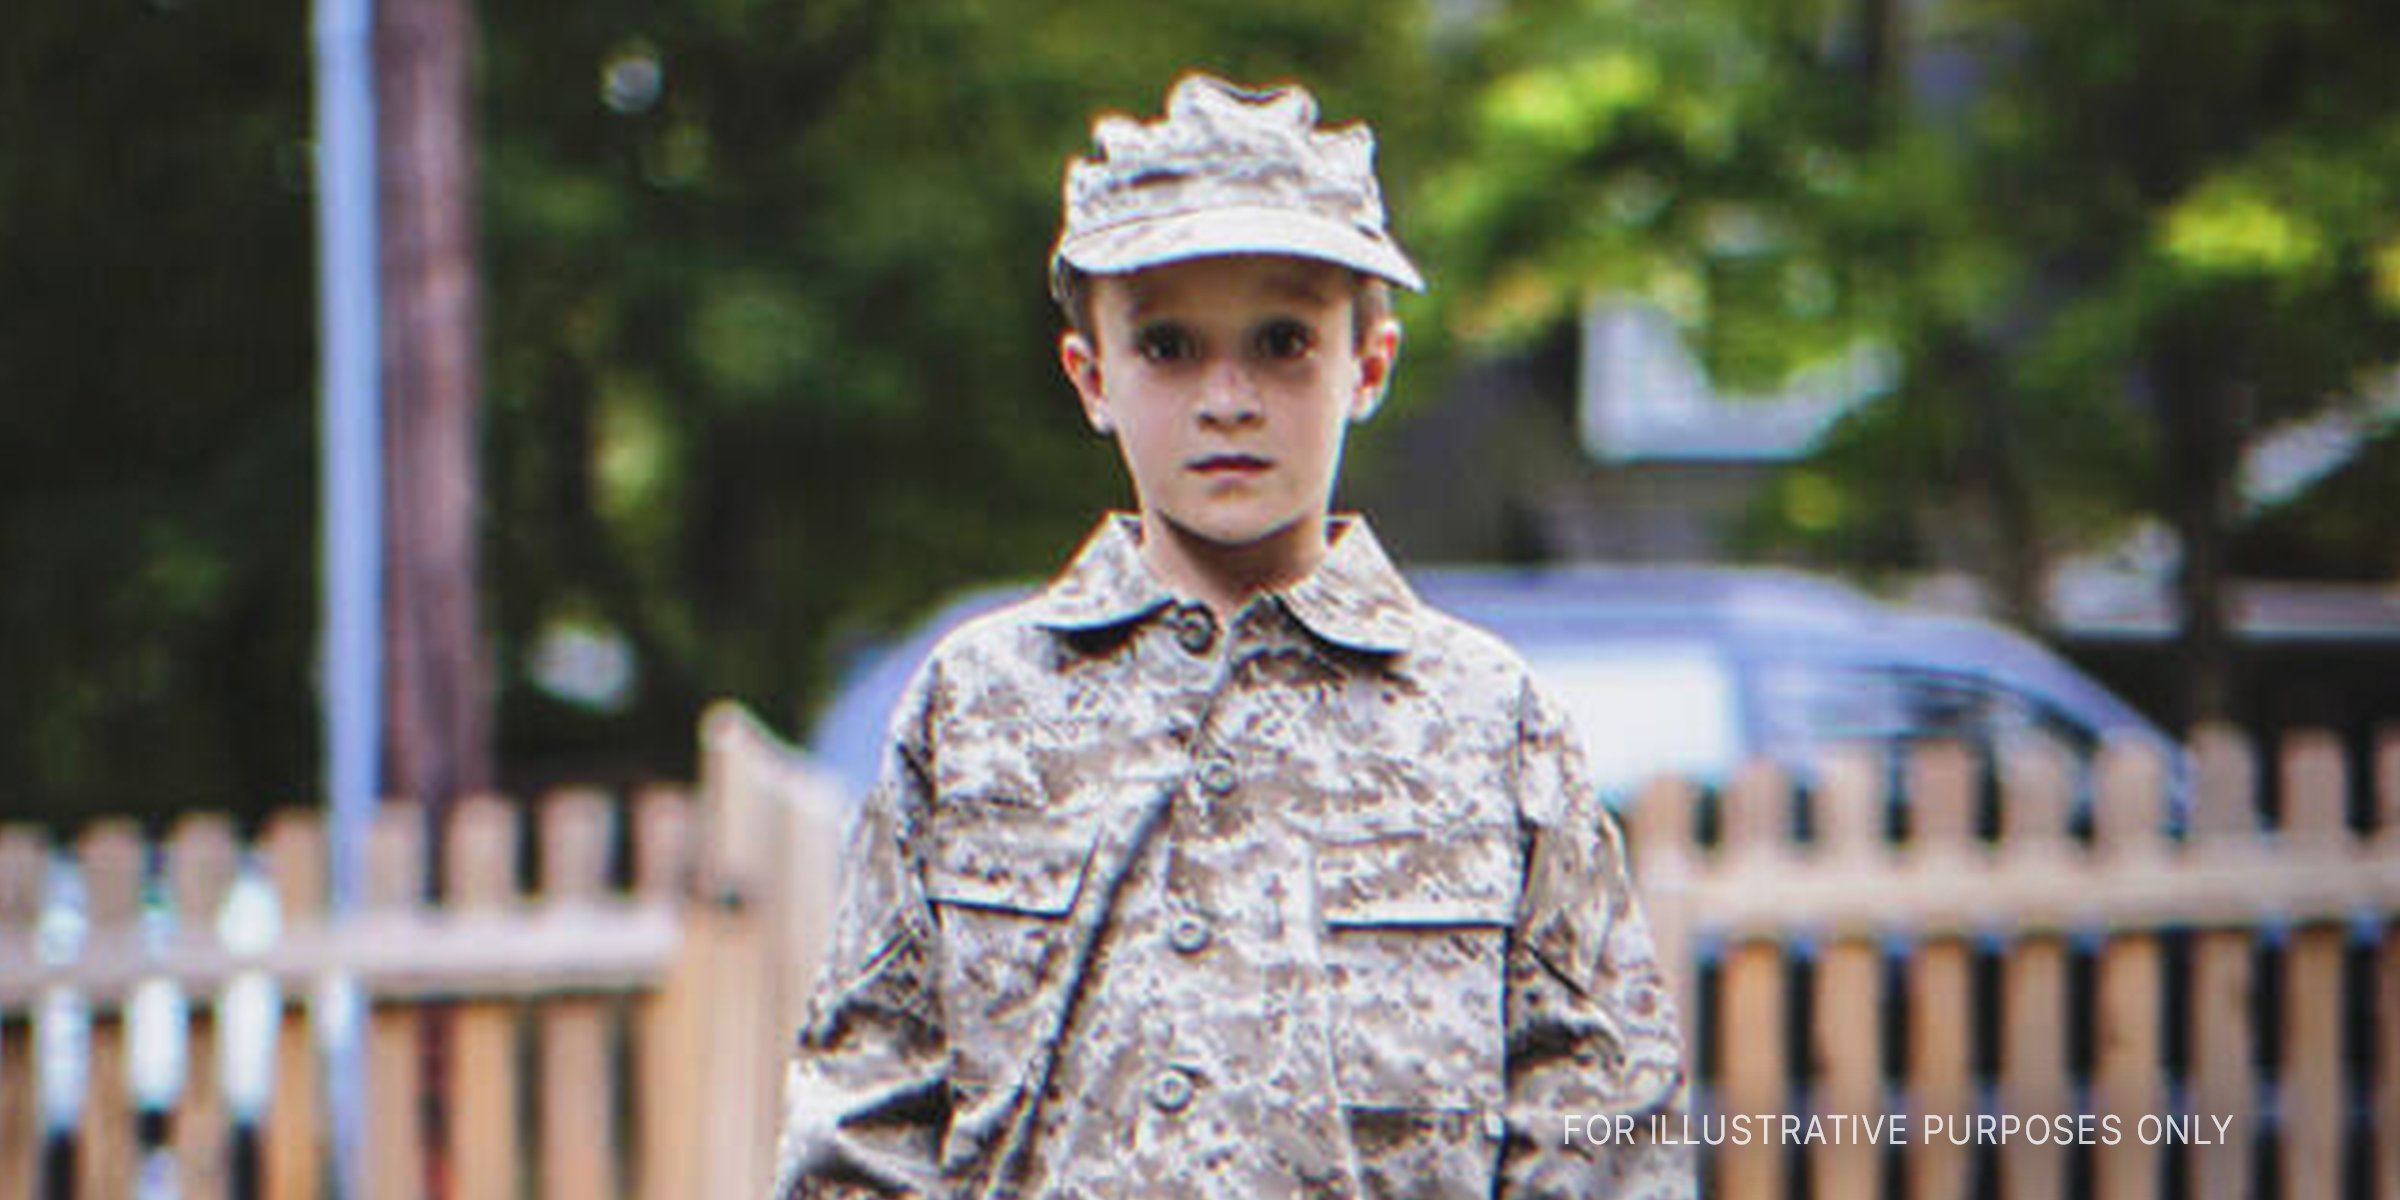 Boy in military uniform. | Source: Getty Images